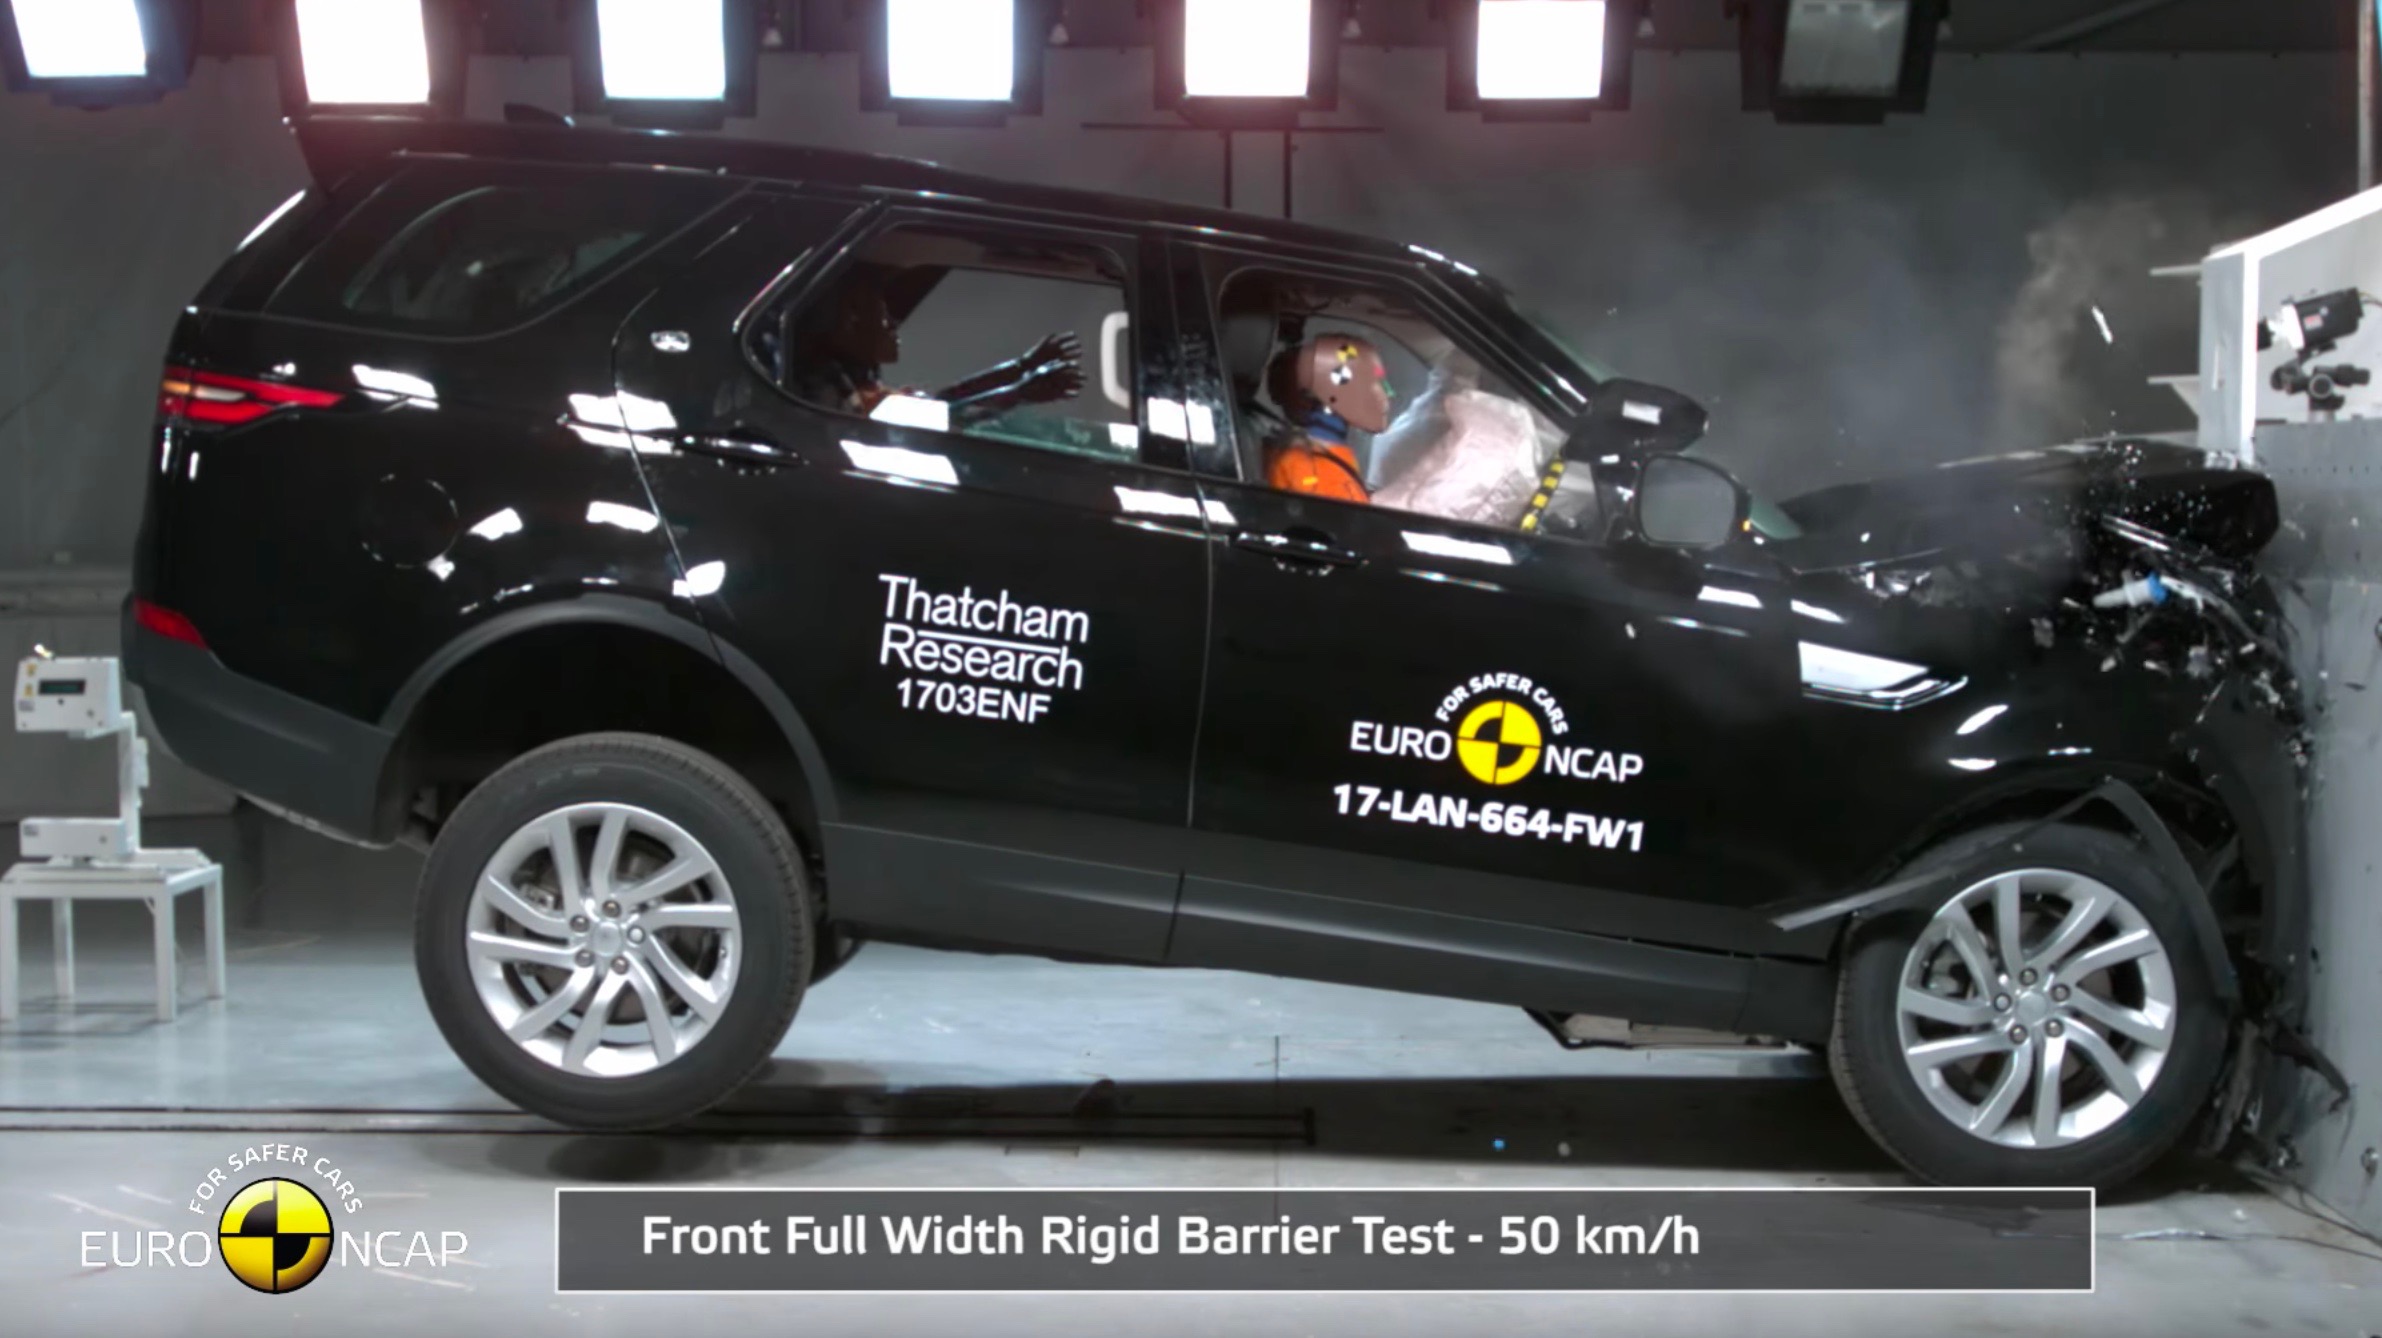 New Toyota C-HR, Land Rover Discovery awarded 5-star ANCAP safety